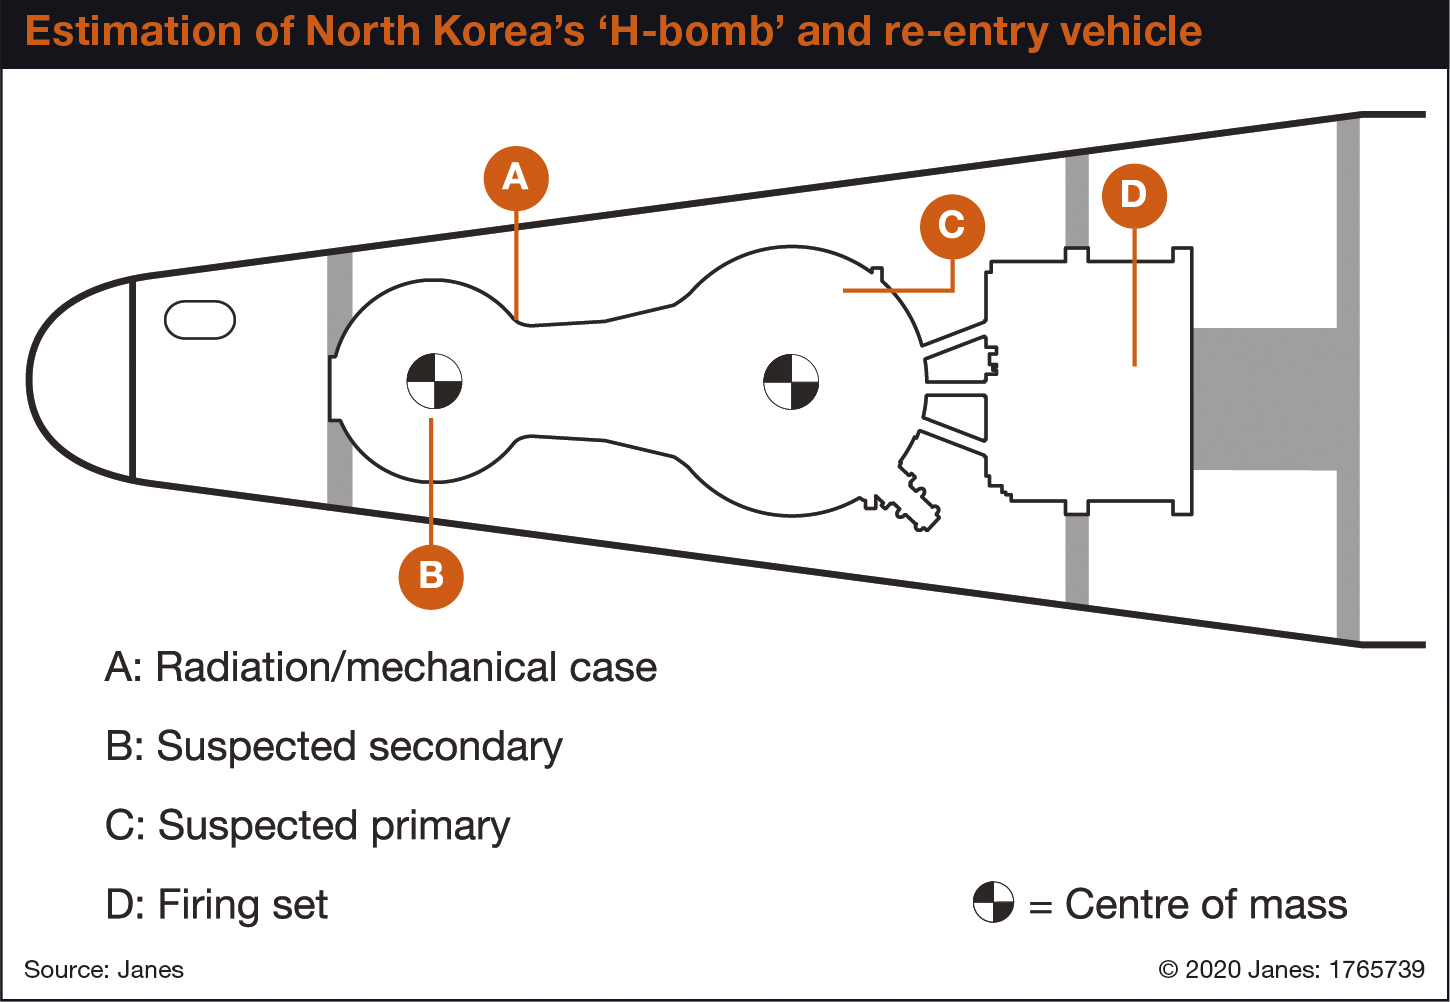 Estimation of NKorea's 'H-bomb' and re-entry vehicle